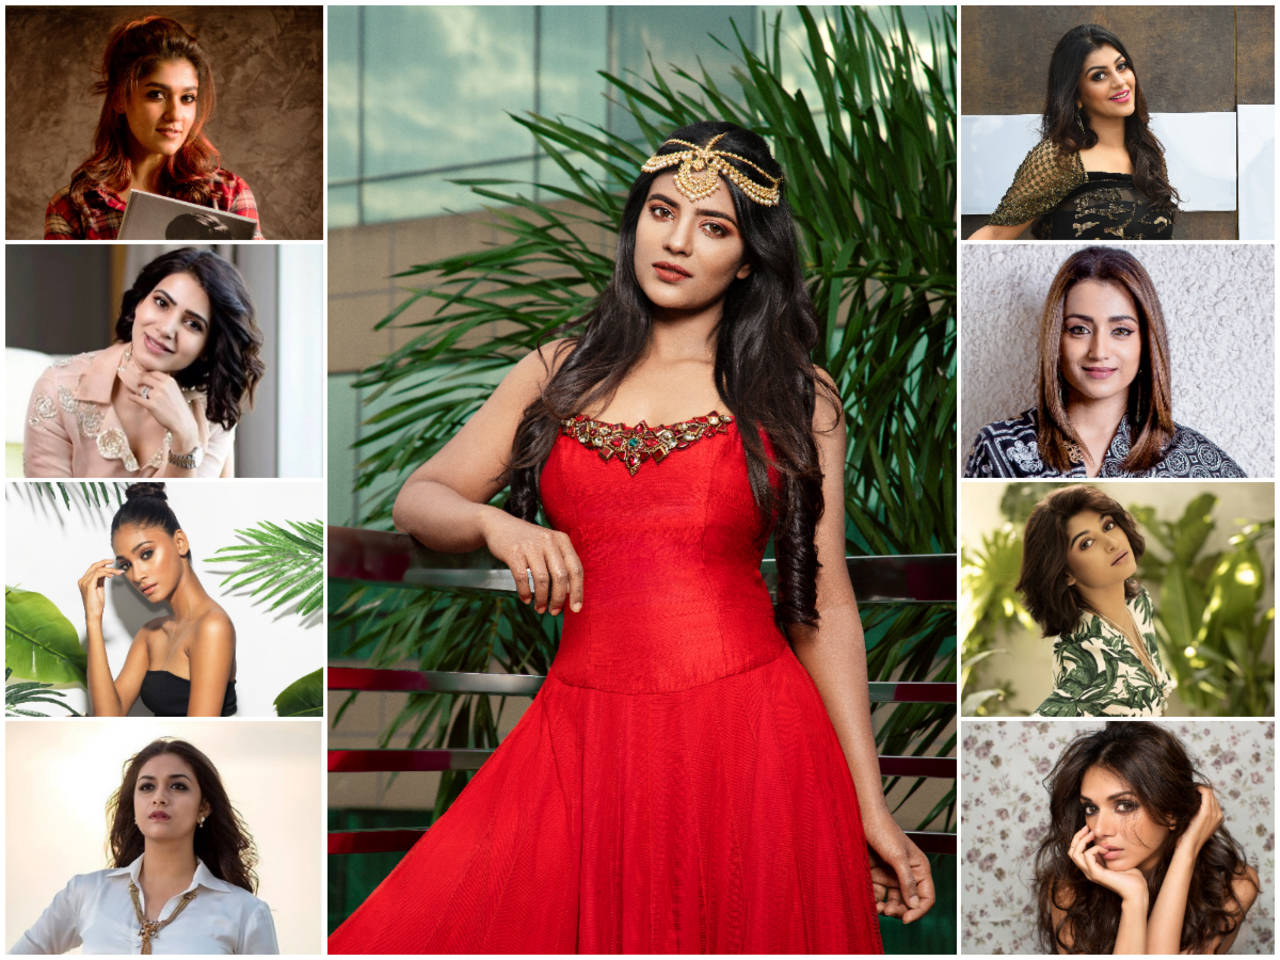 Chennai Times 30 Most Desirable Women of 2018 Tamil Movie News pic